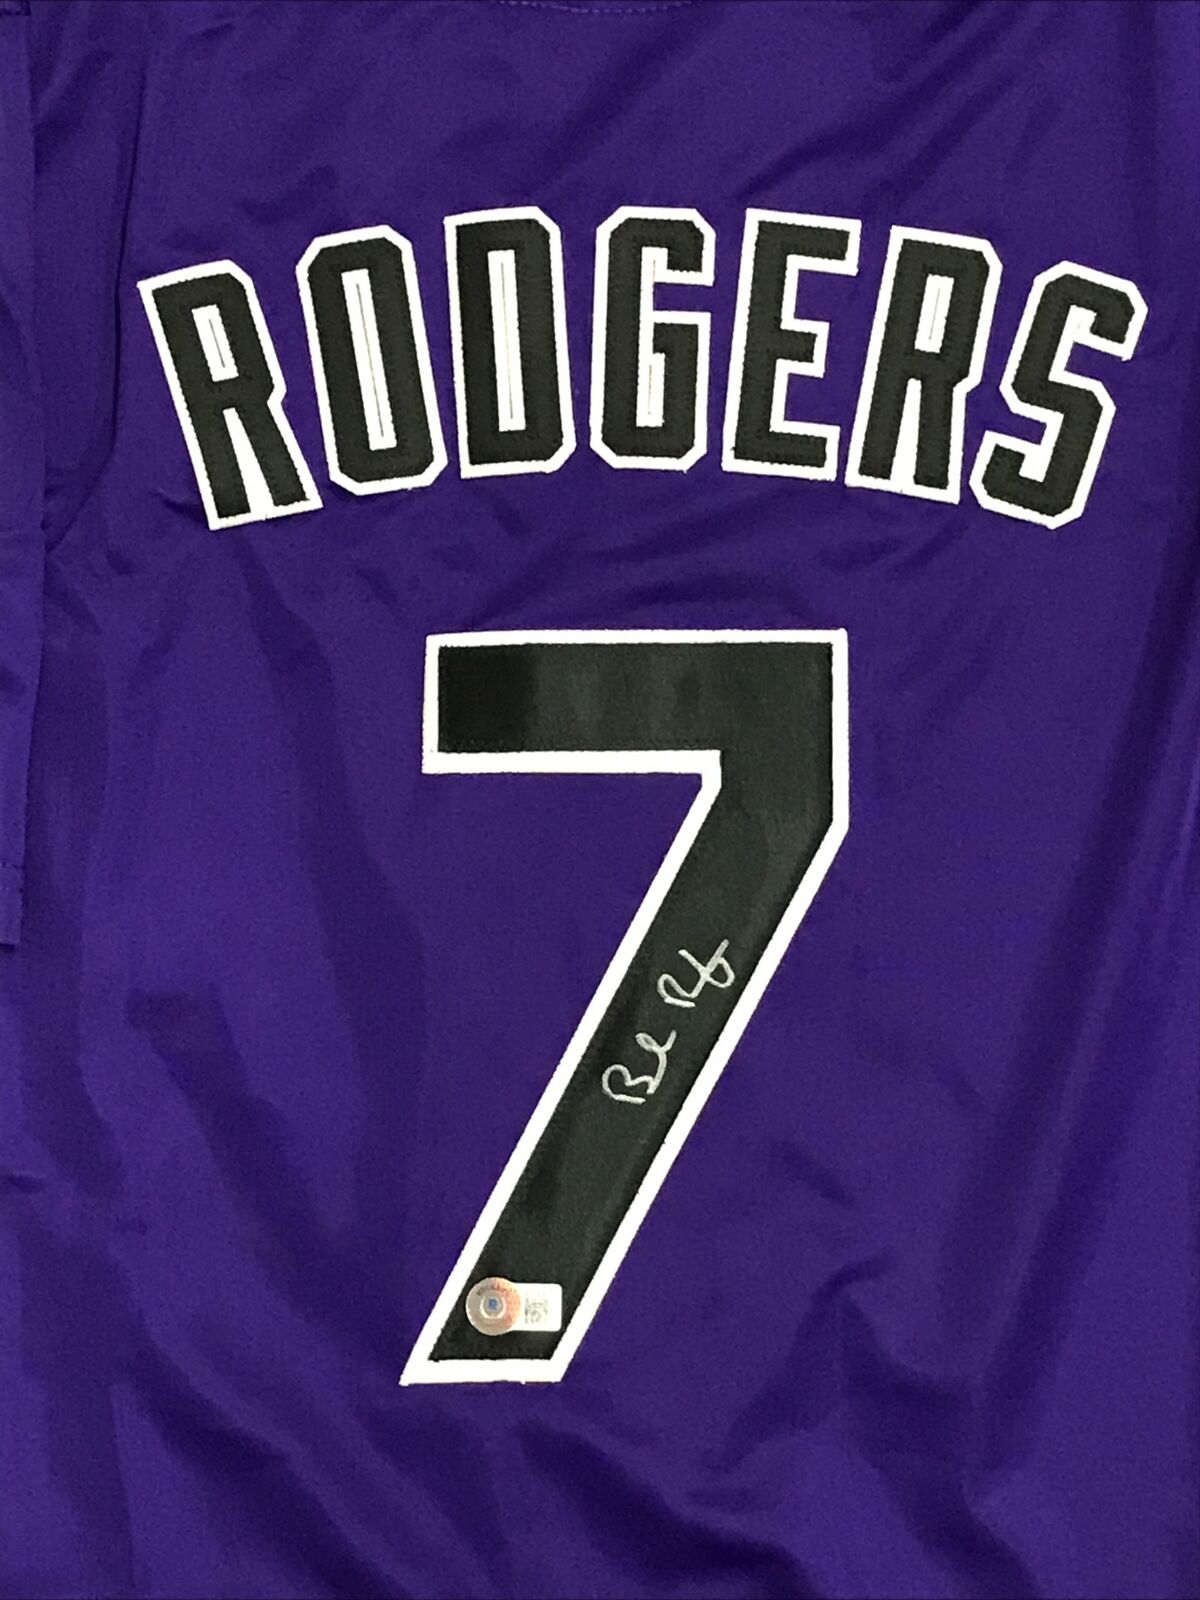 Brendan Rodgers Signed Jersey Colorado Rockies Home Autographed Auto With COA!